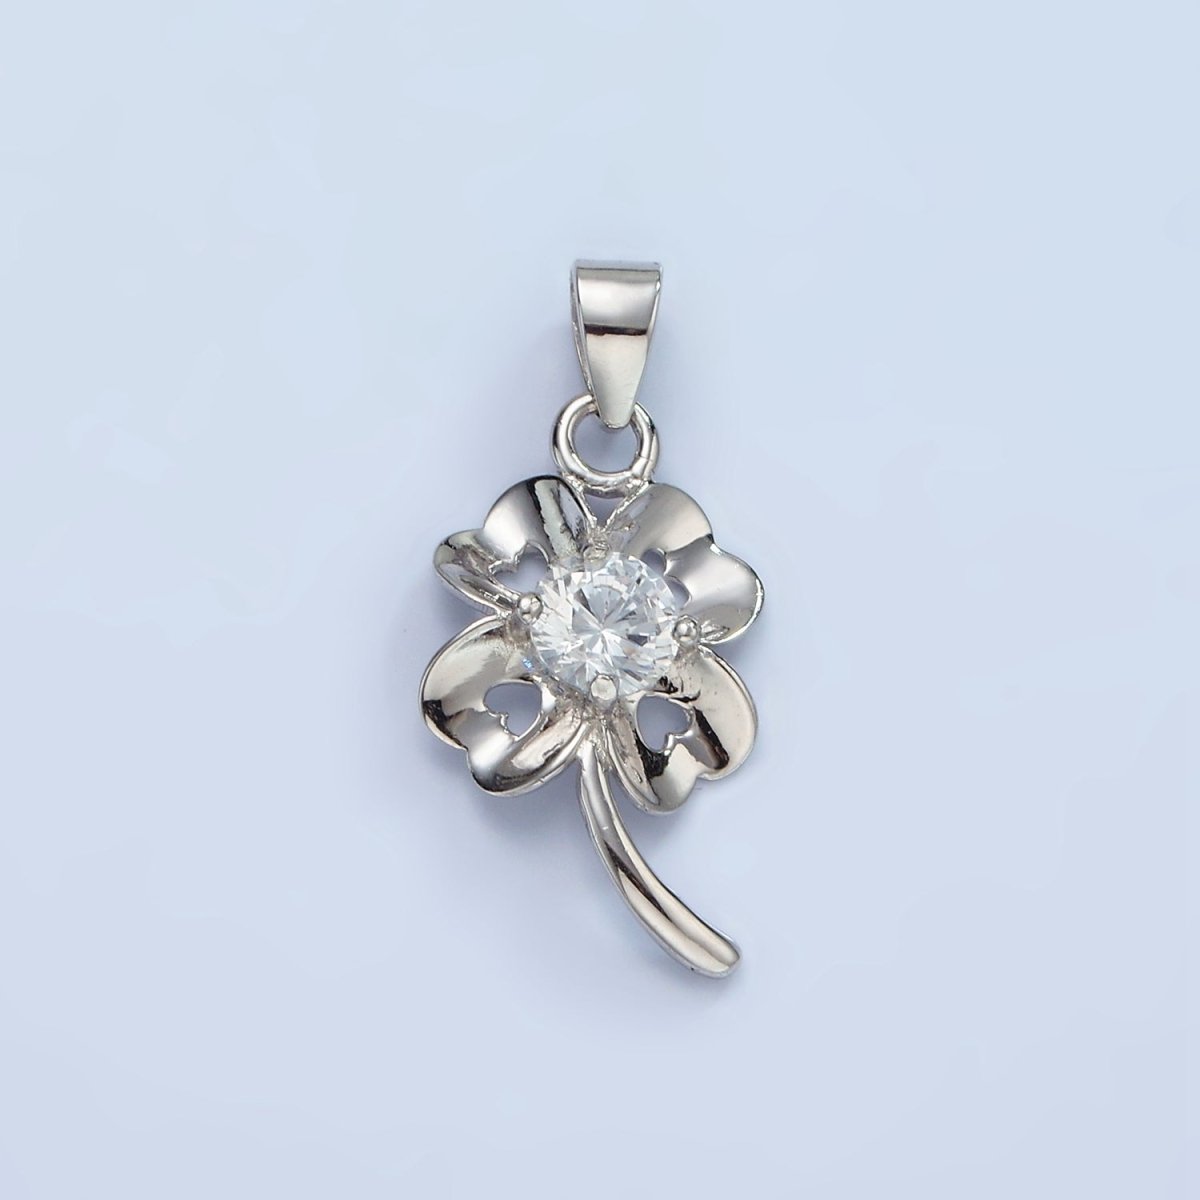 S925 Sterling Silver Clover Pendant Lucky Charm with Cz Stone | SL-471 - DLUXCA